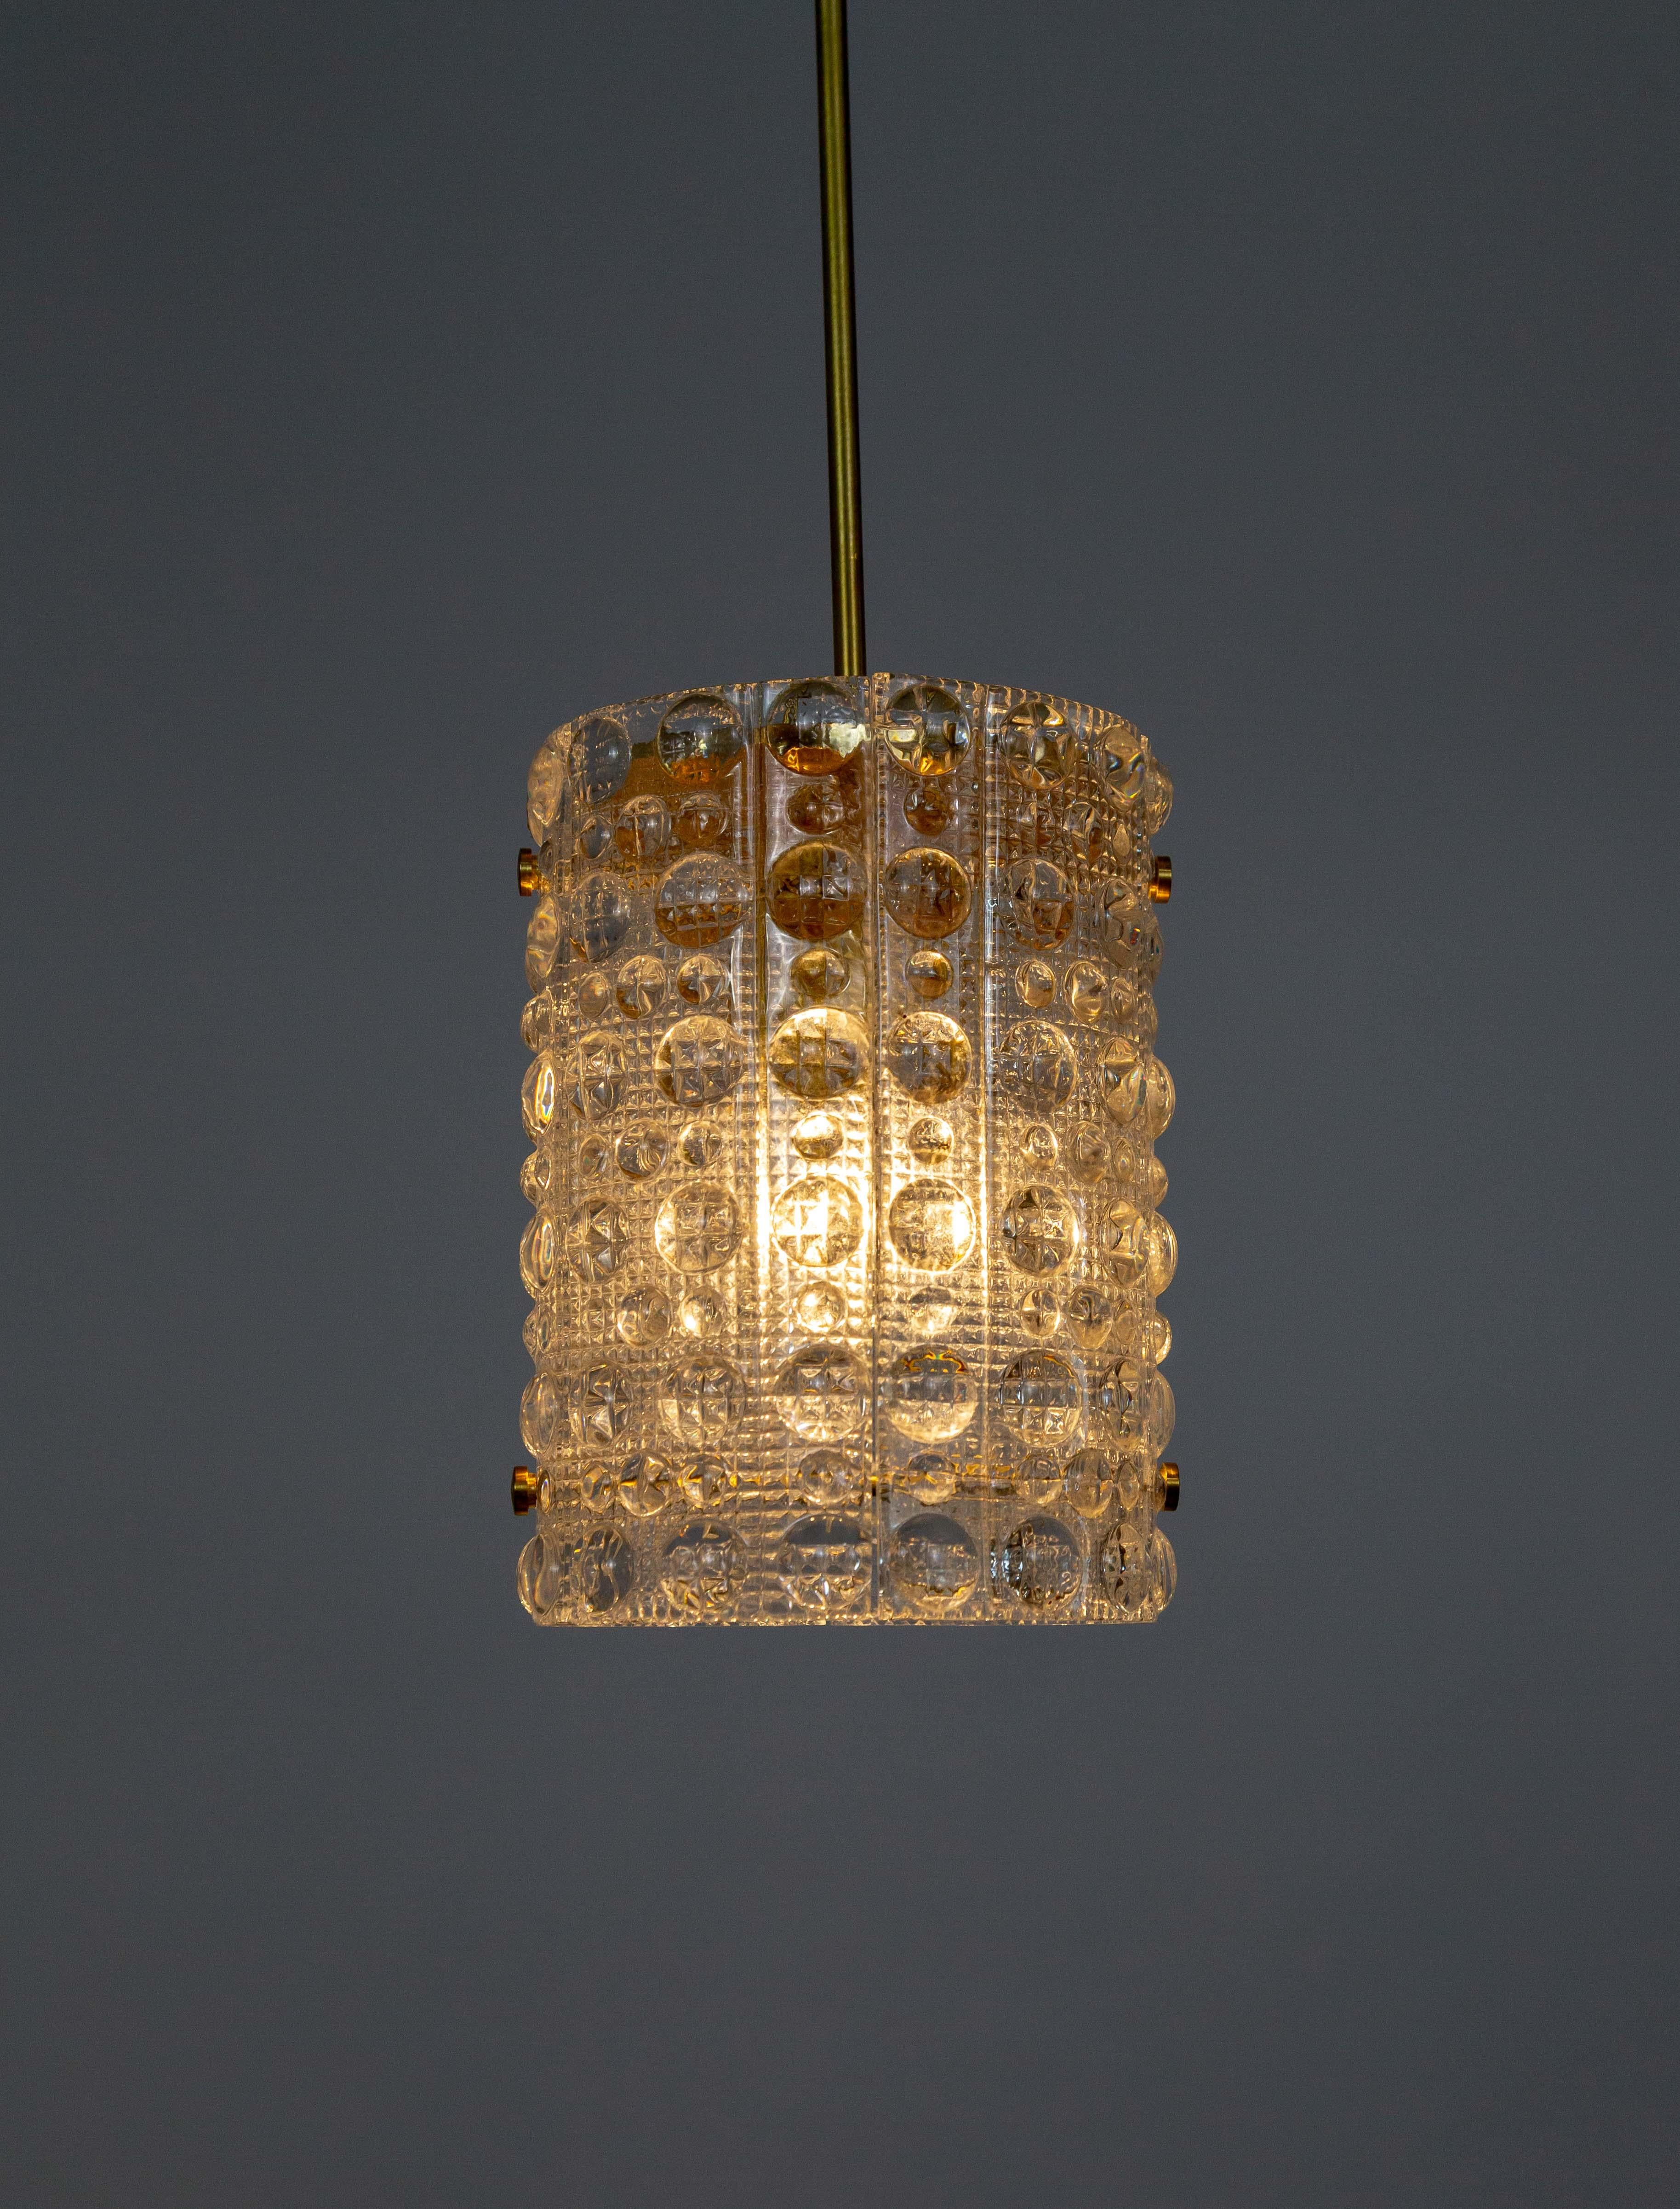 A pendant light from Orrefors by Carl Fagerlund in his Venus-style, cylindrical shaped, molded crystal glass texture. It has a long, narrow brass stem and a spun raw brass top diffuser. The two glass parts are held in place with two inner bars. All